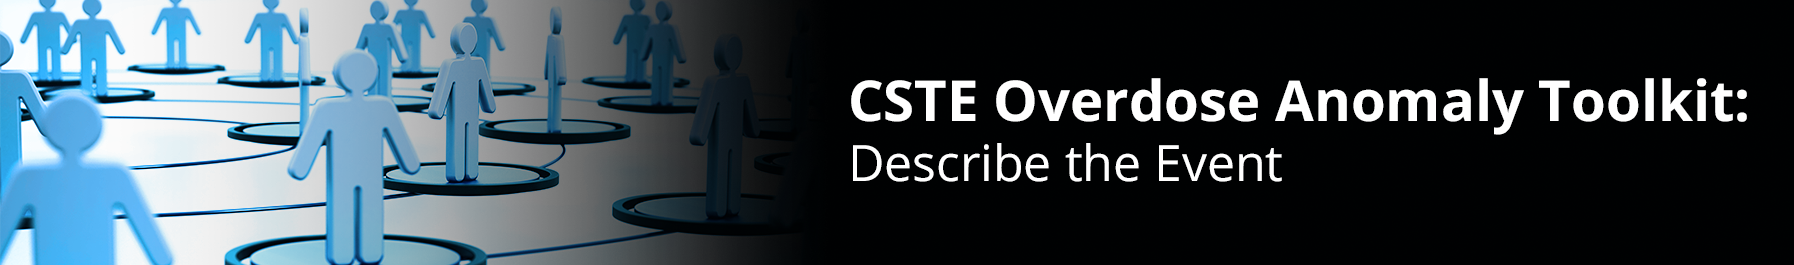 CSTE Overdose Anomaly Toolkit: Describe the Event 